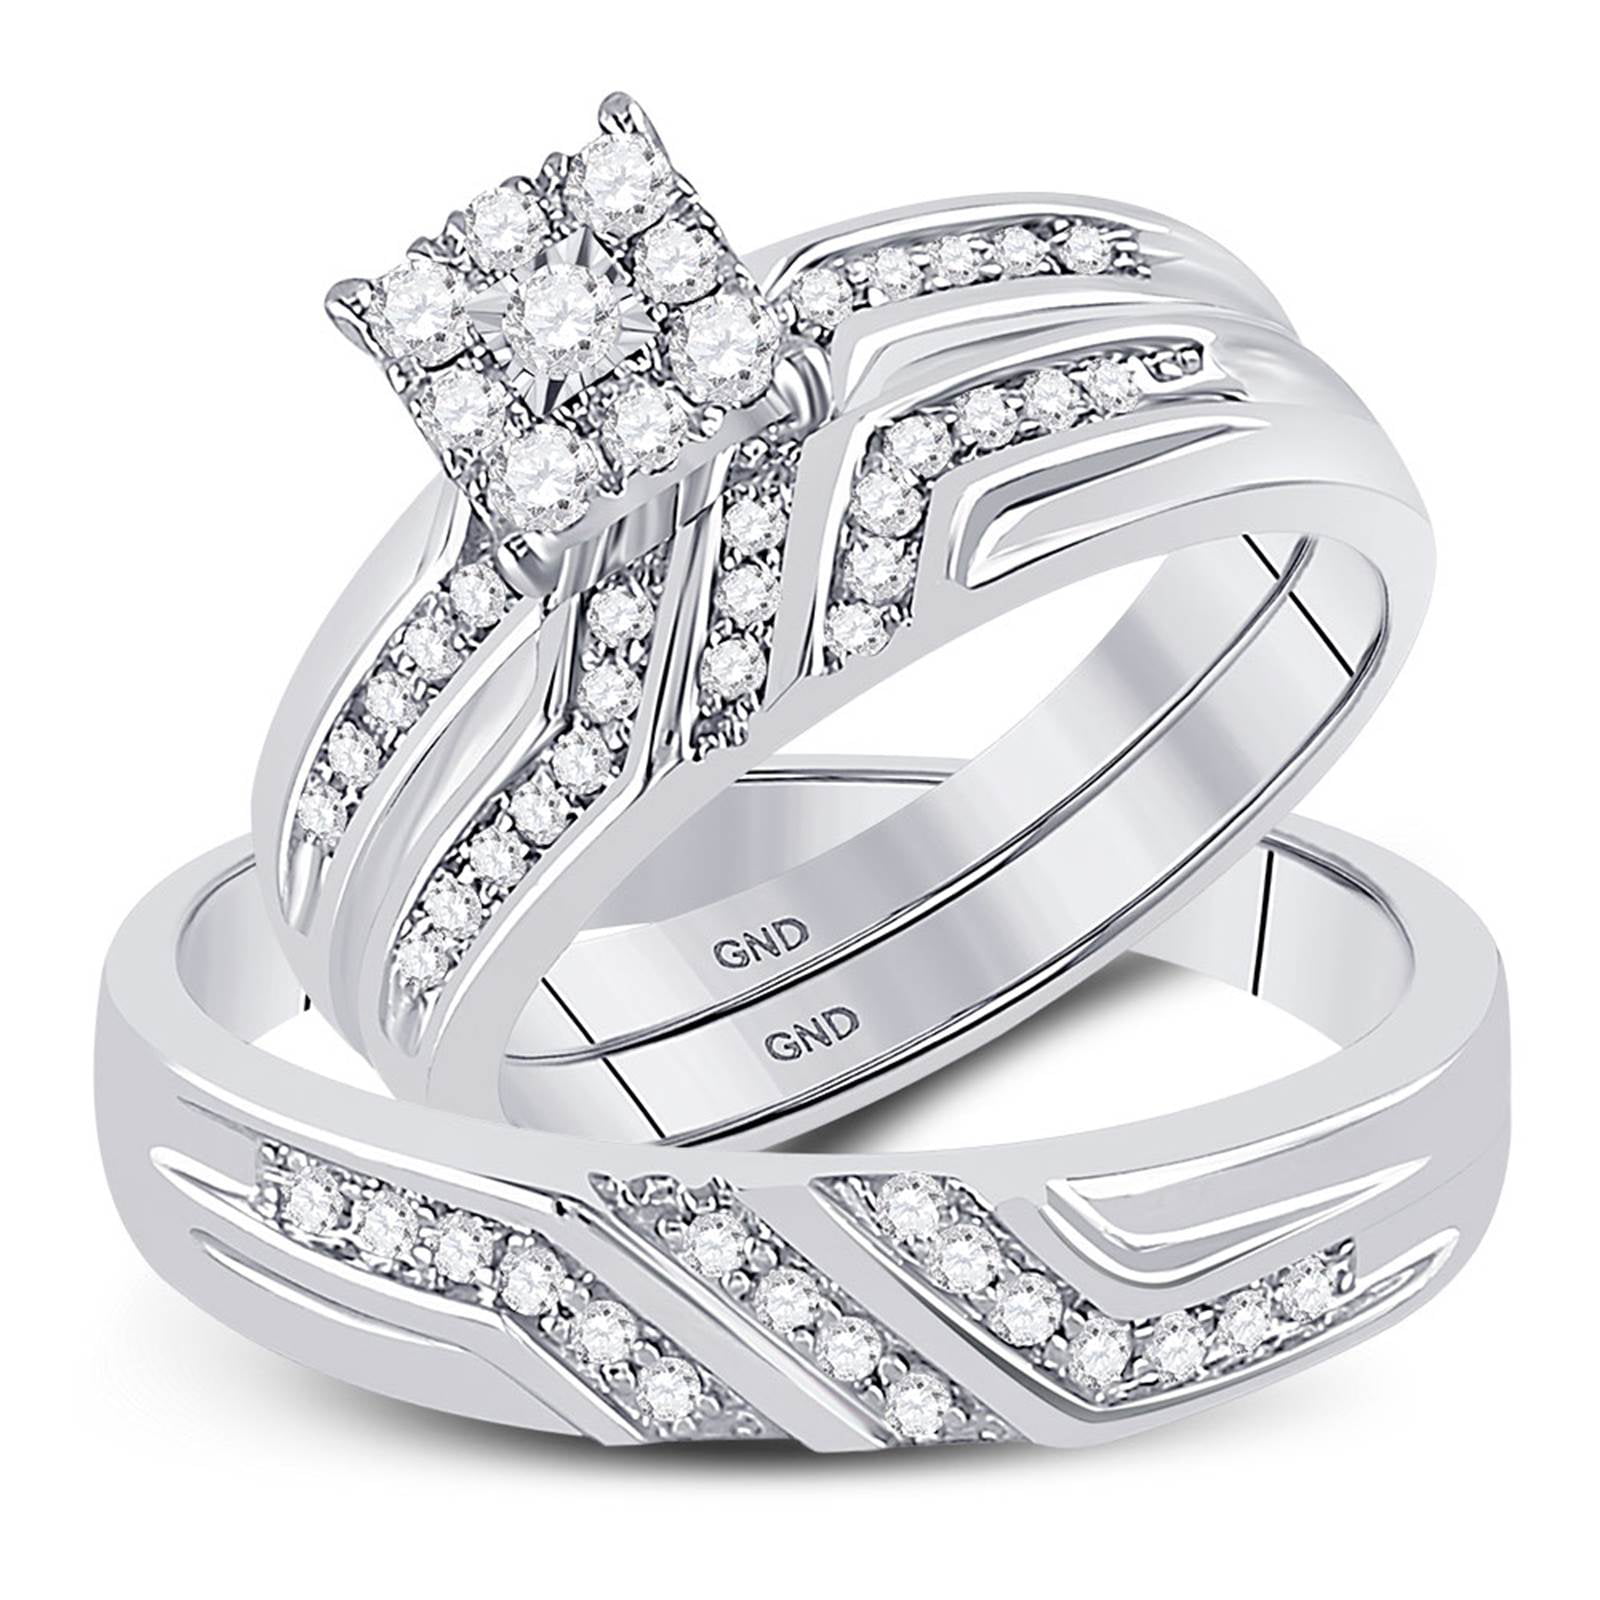 Fusion Collections 10kt White Gold Round Diamond His & Hers Bridal